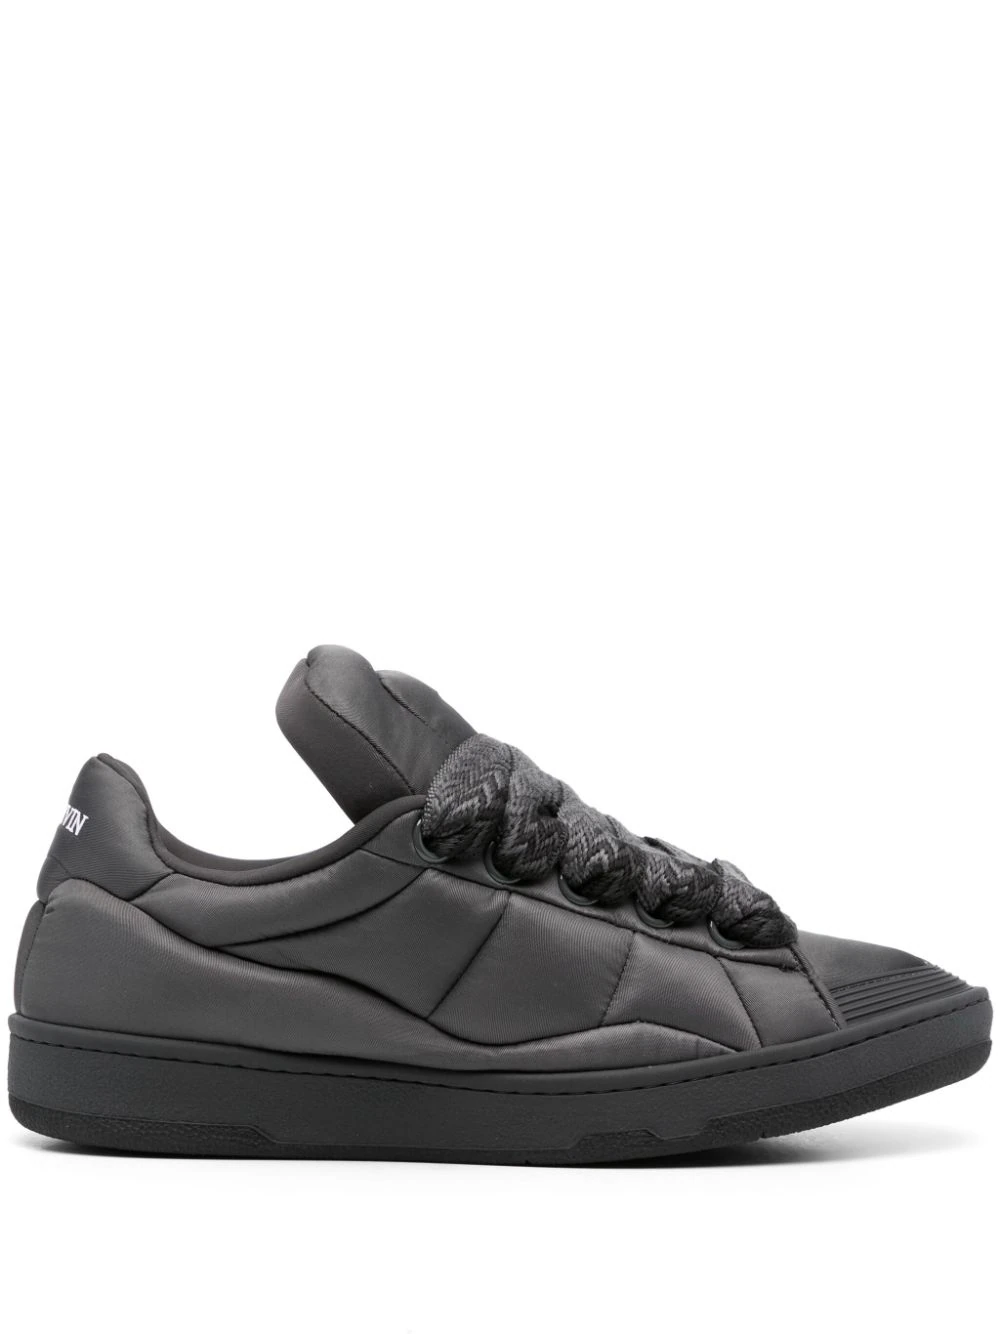 lanvin sneakers with oversized laces